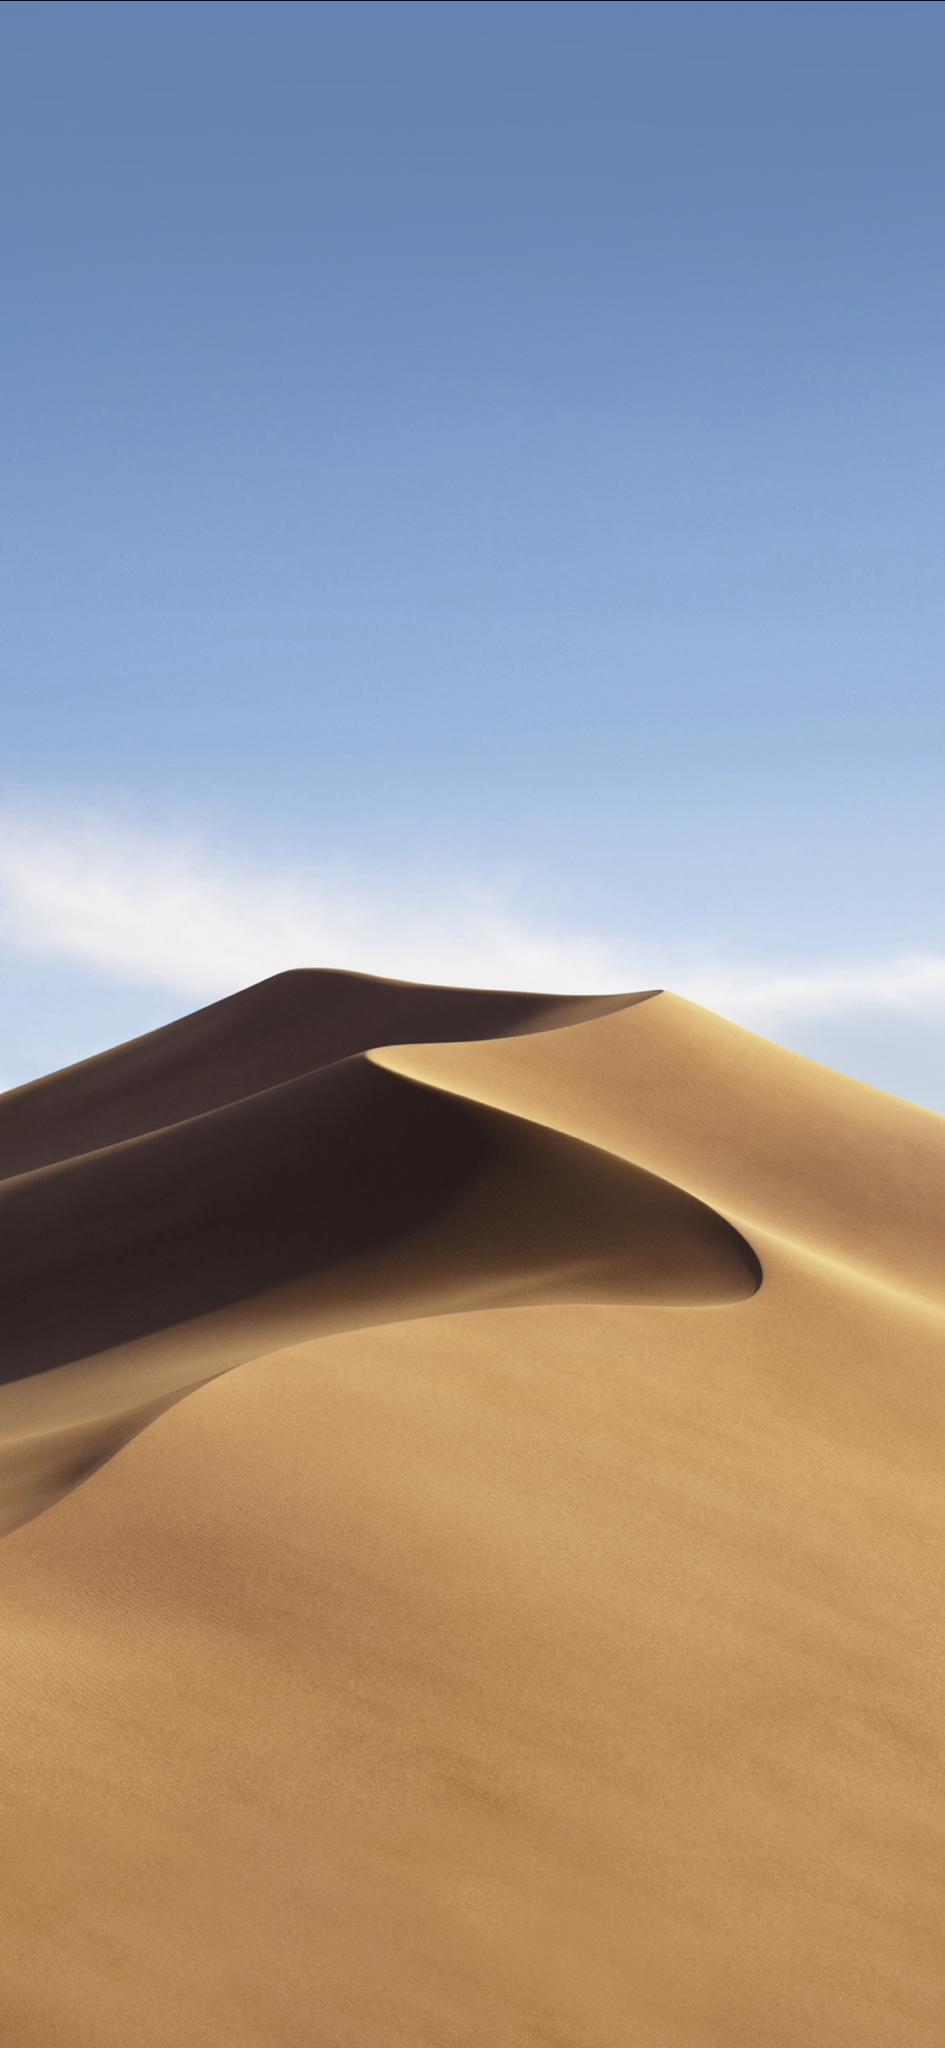 Mojave Dynamic Wallpaper For Iphone - HD Wallpaper 